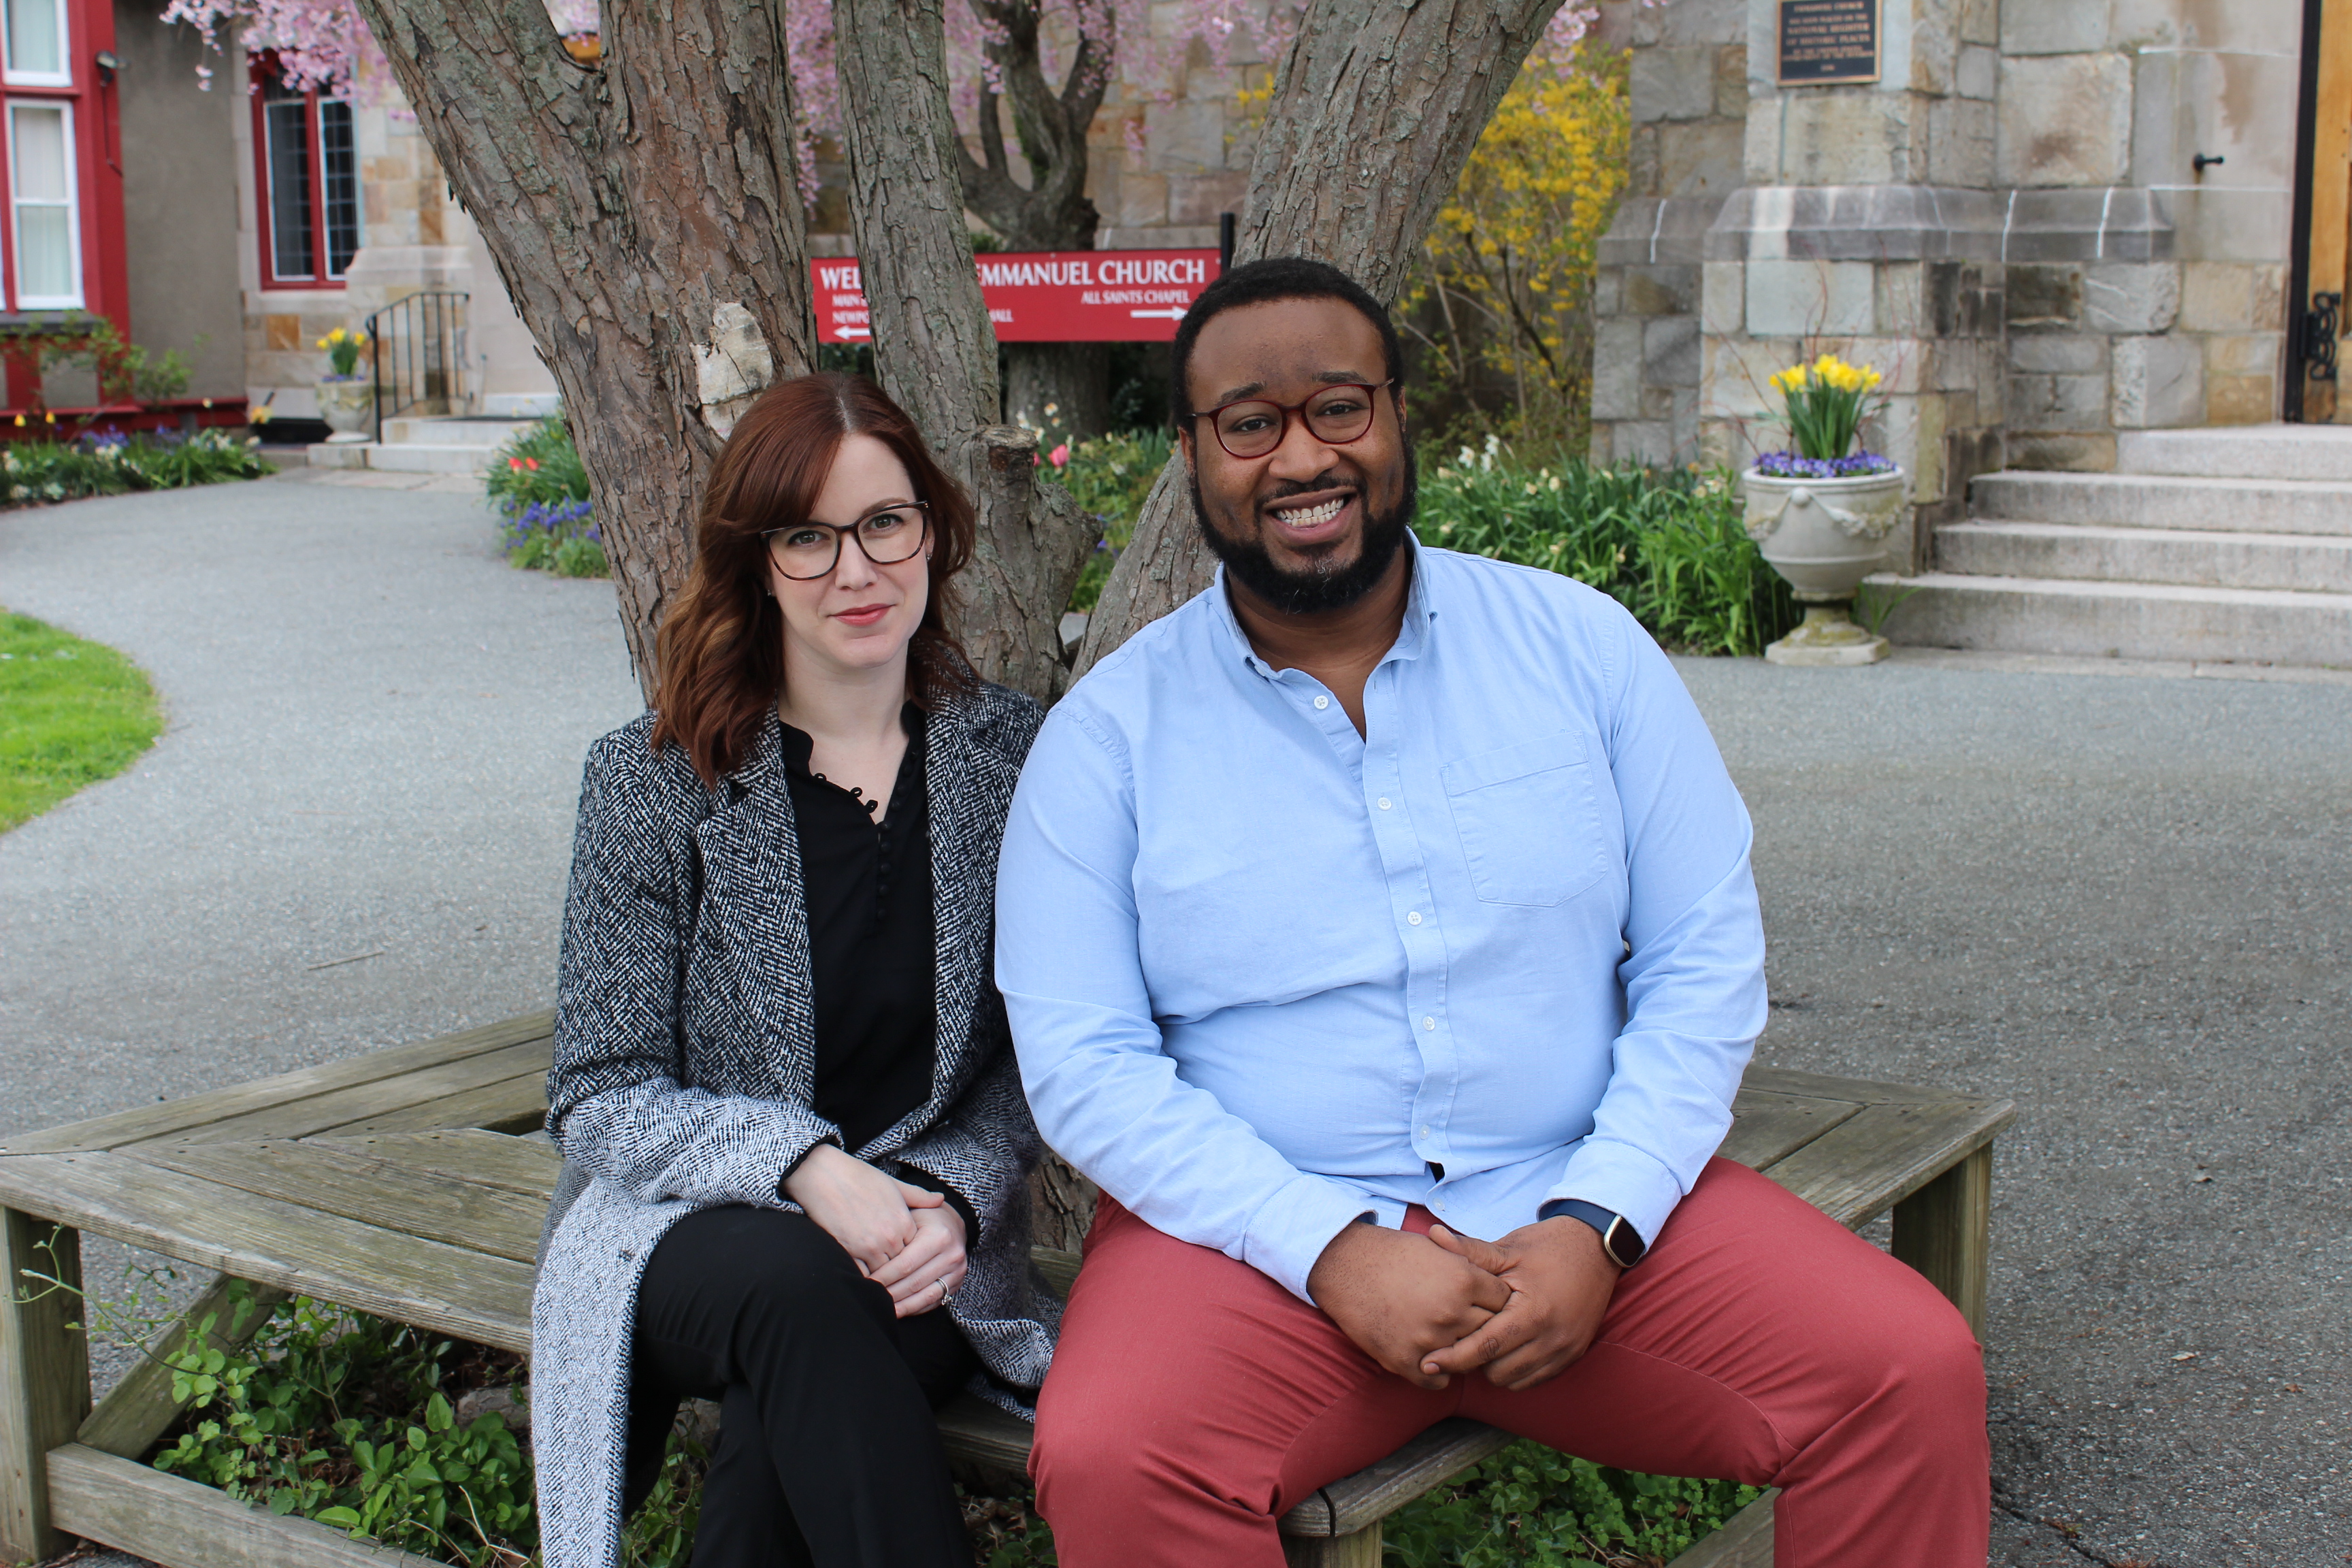 Executive Director Gillian Friedman Fox and Trevor Neal, Director of Artistic Planning and Engagement, have been leading Newport Classical through a renaming and rebranding.